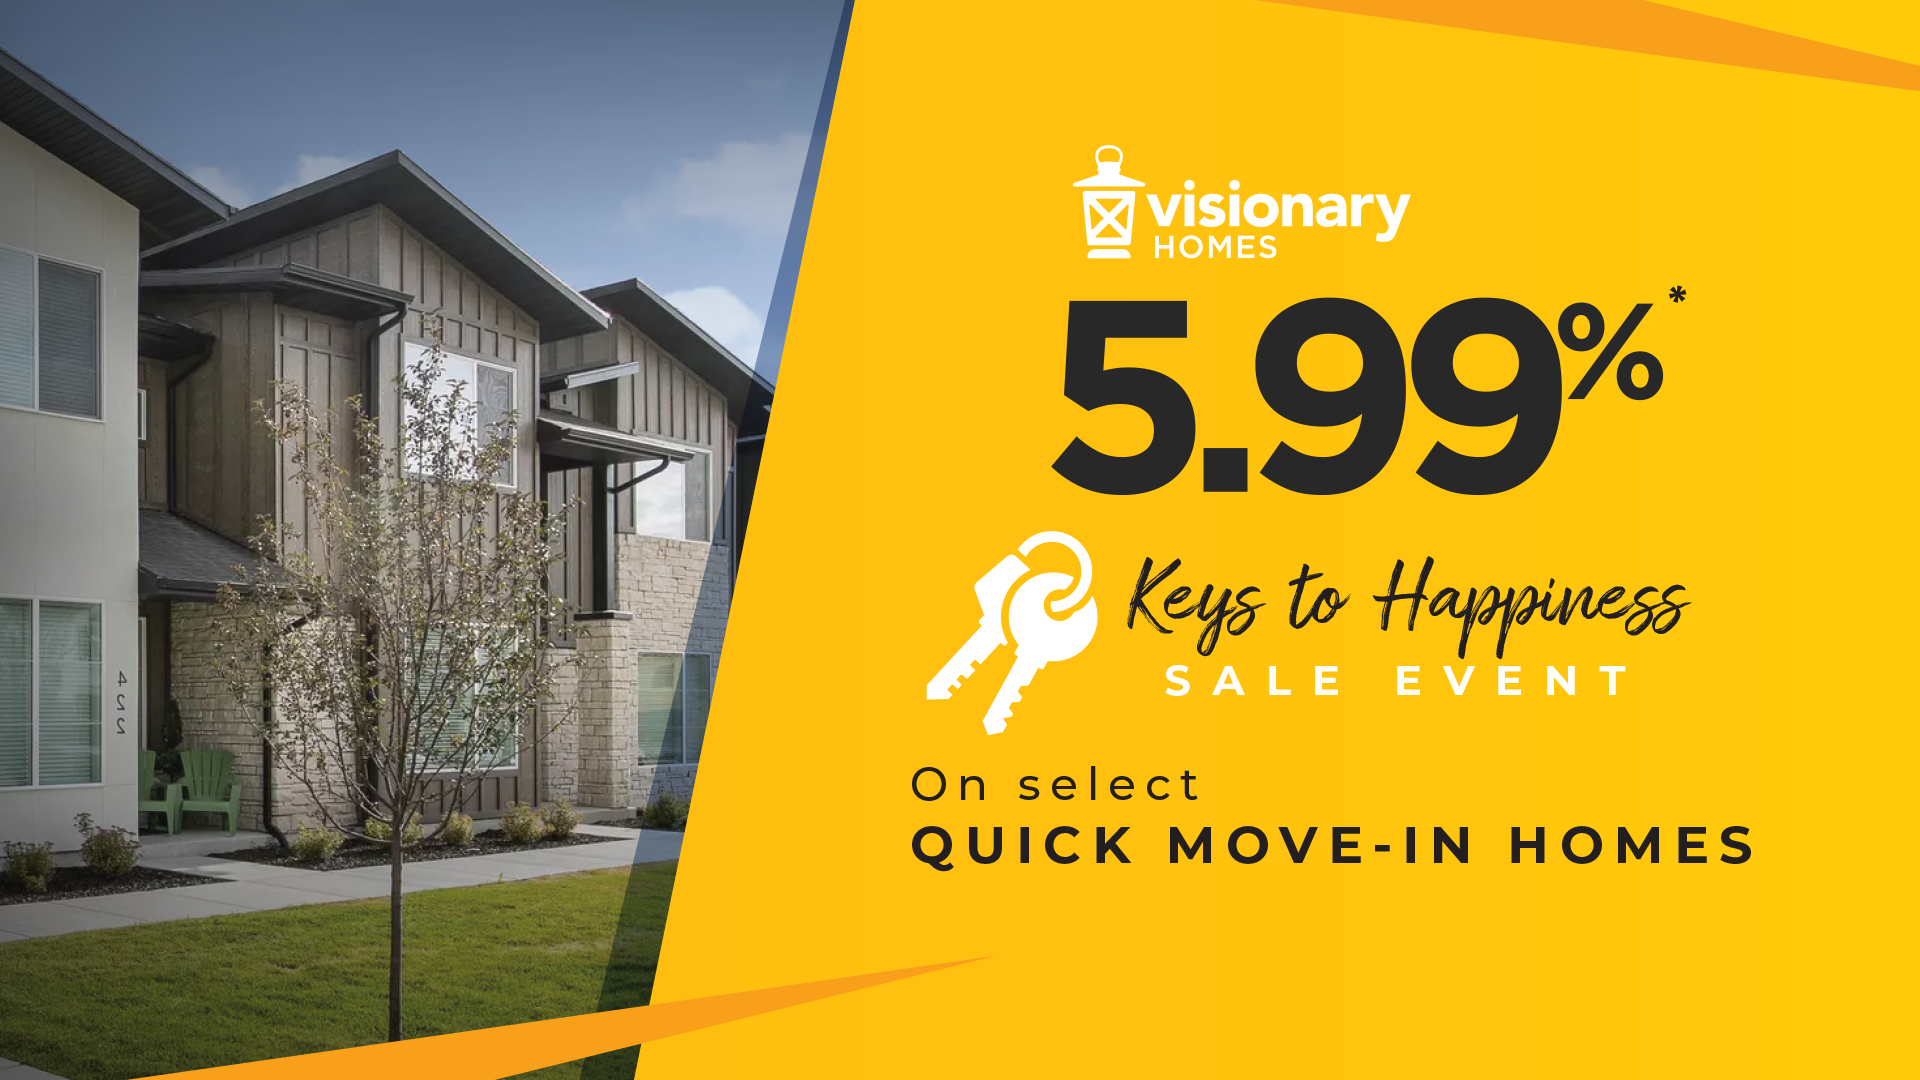 Visionary Homes in Utah Rates as low as 5.99% on Quick Move-In Homes!